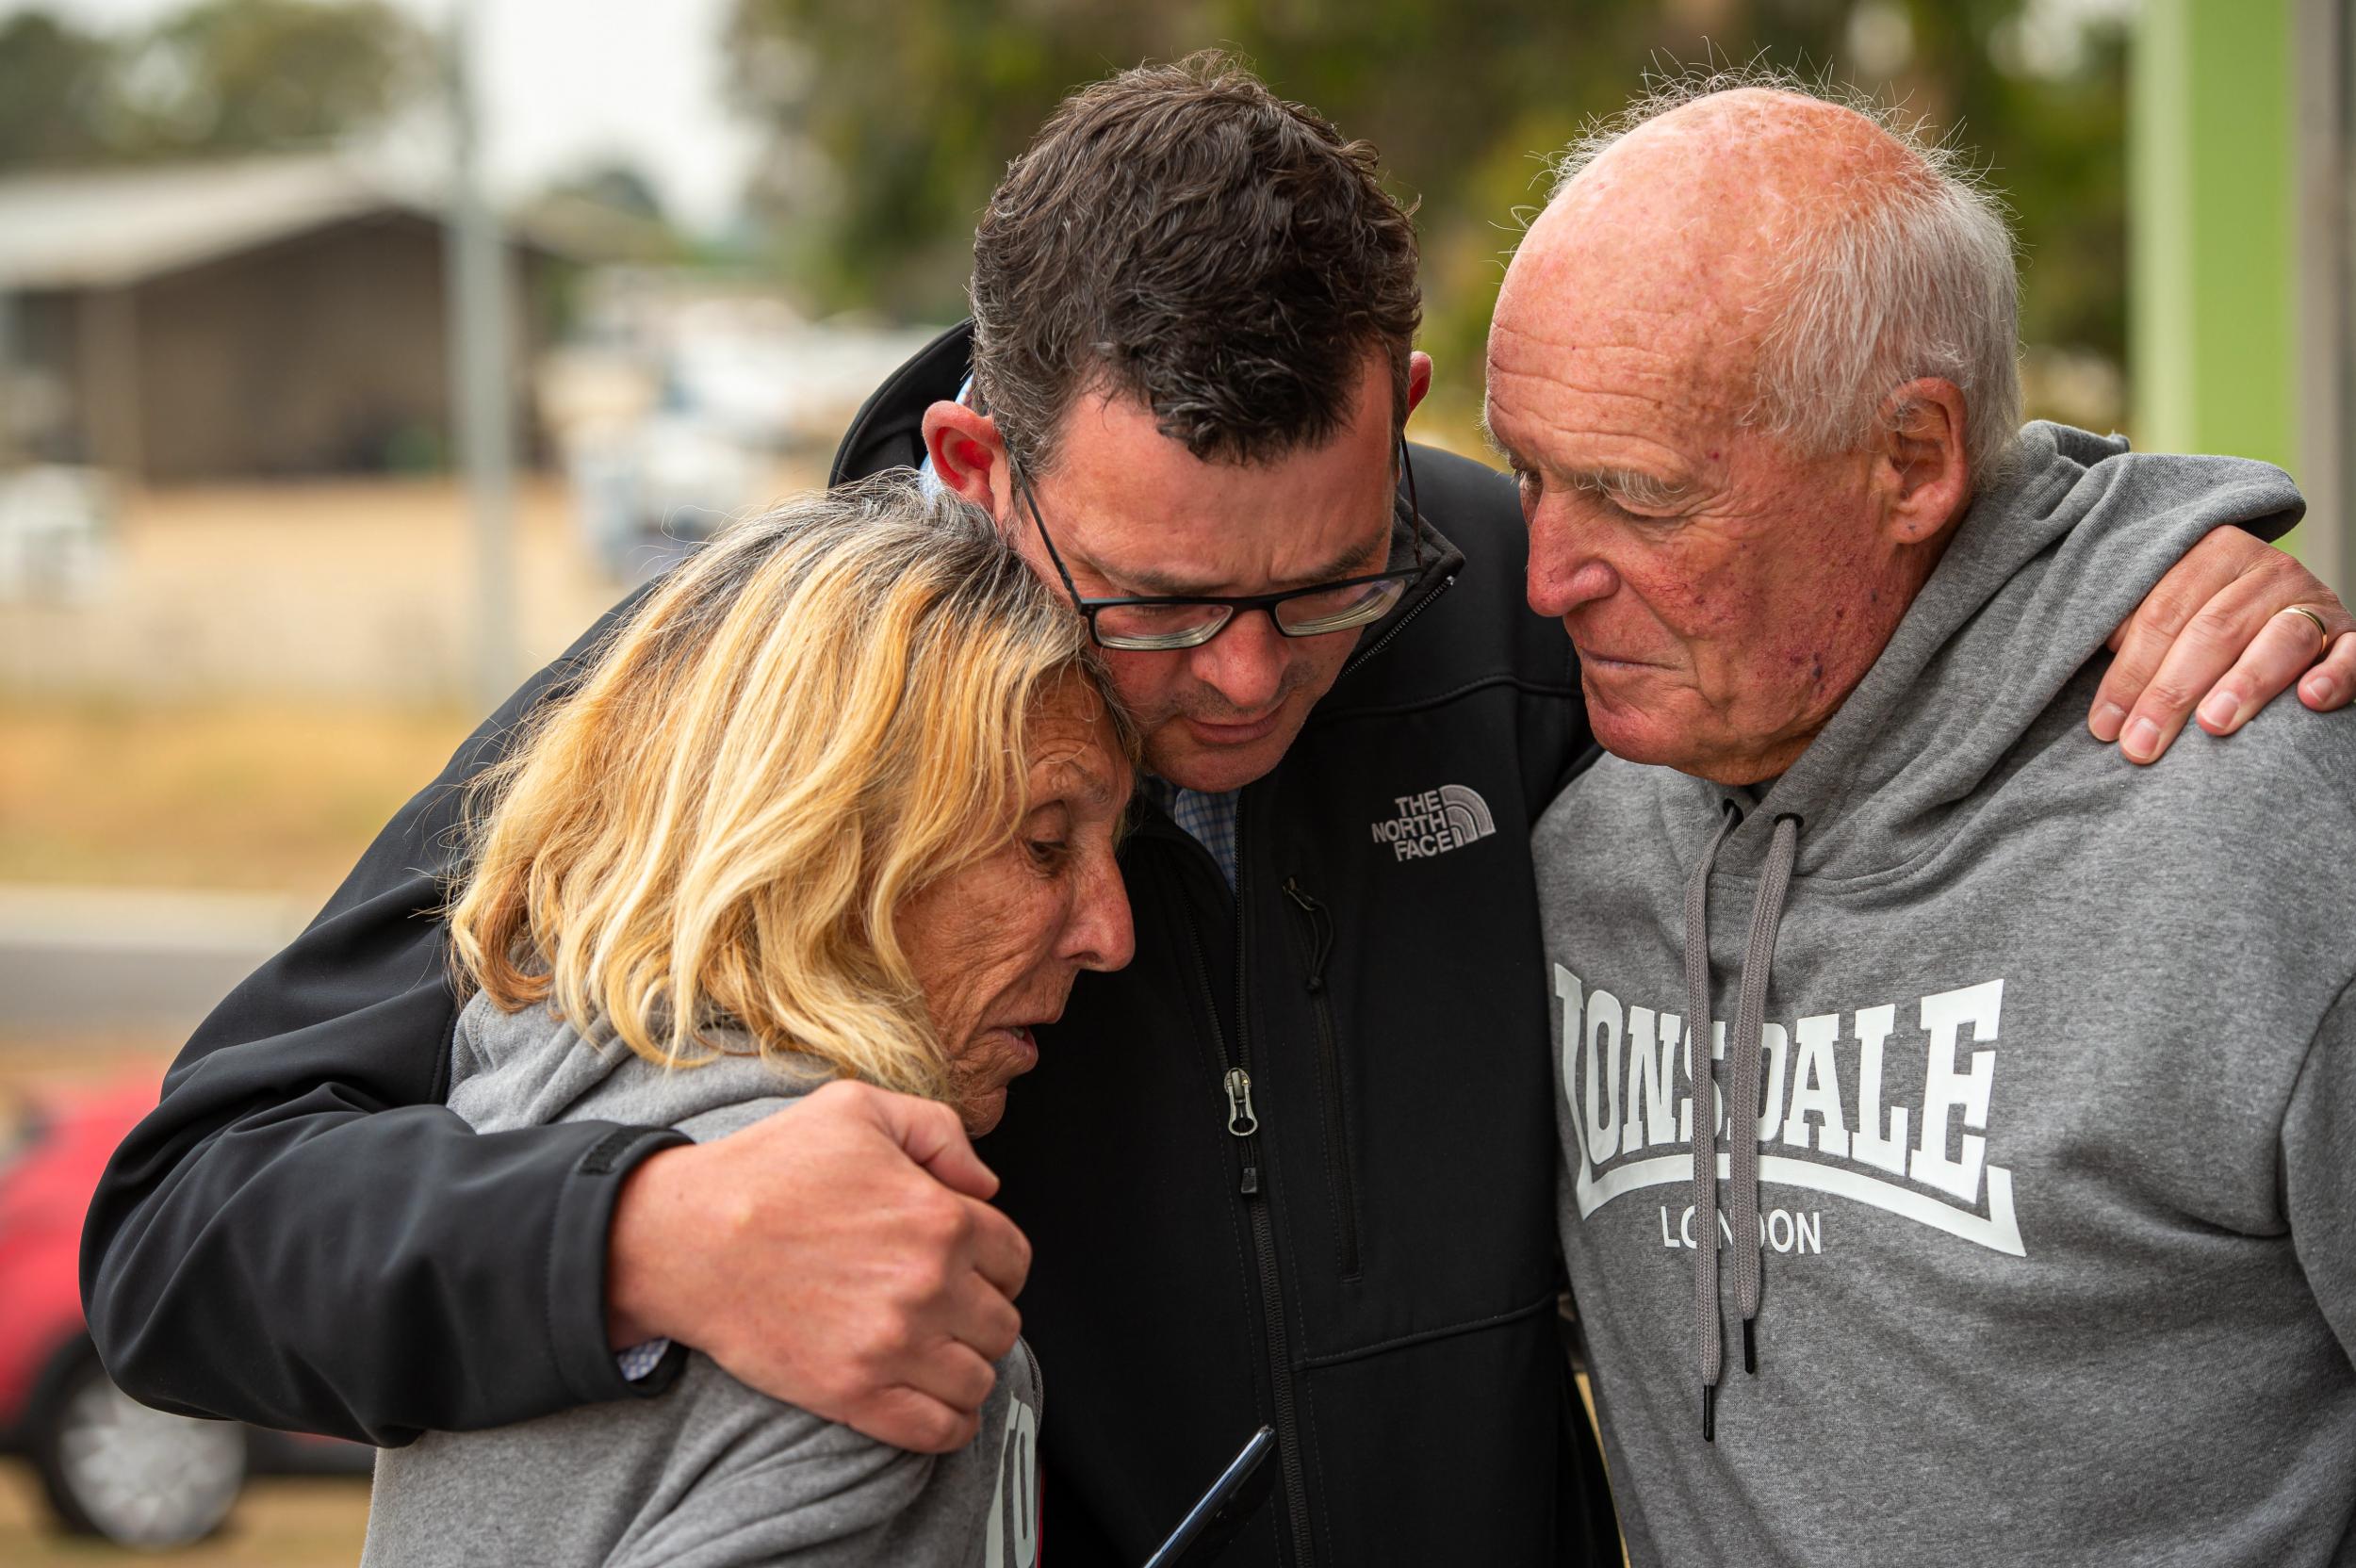 Daniel Andrews, the Victoria premier, comforts a couple who lost their home